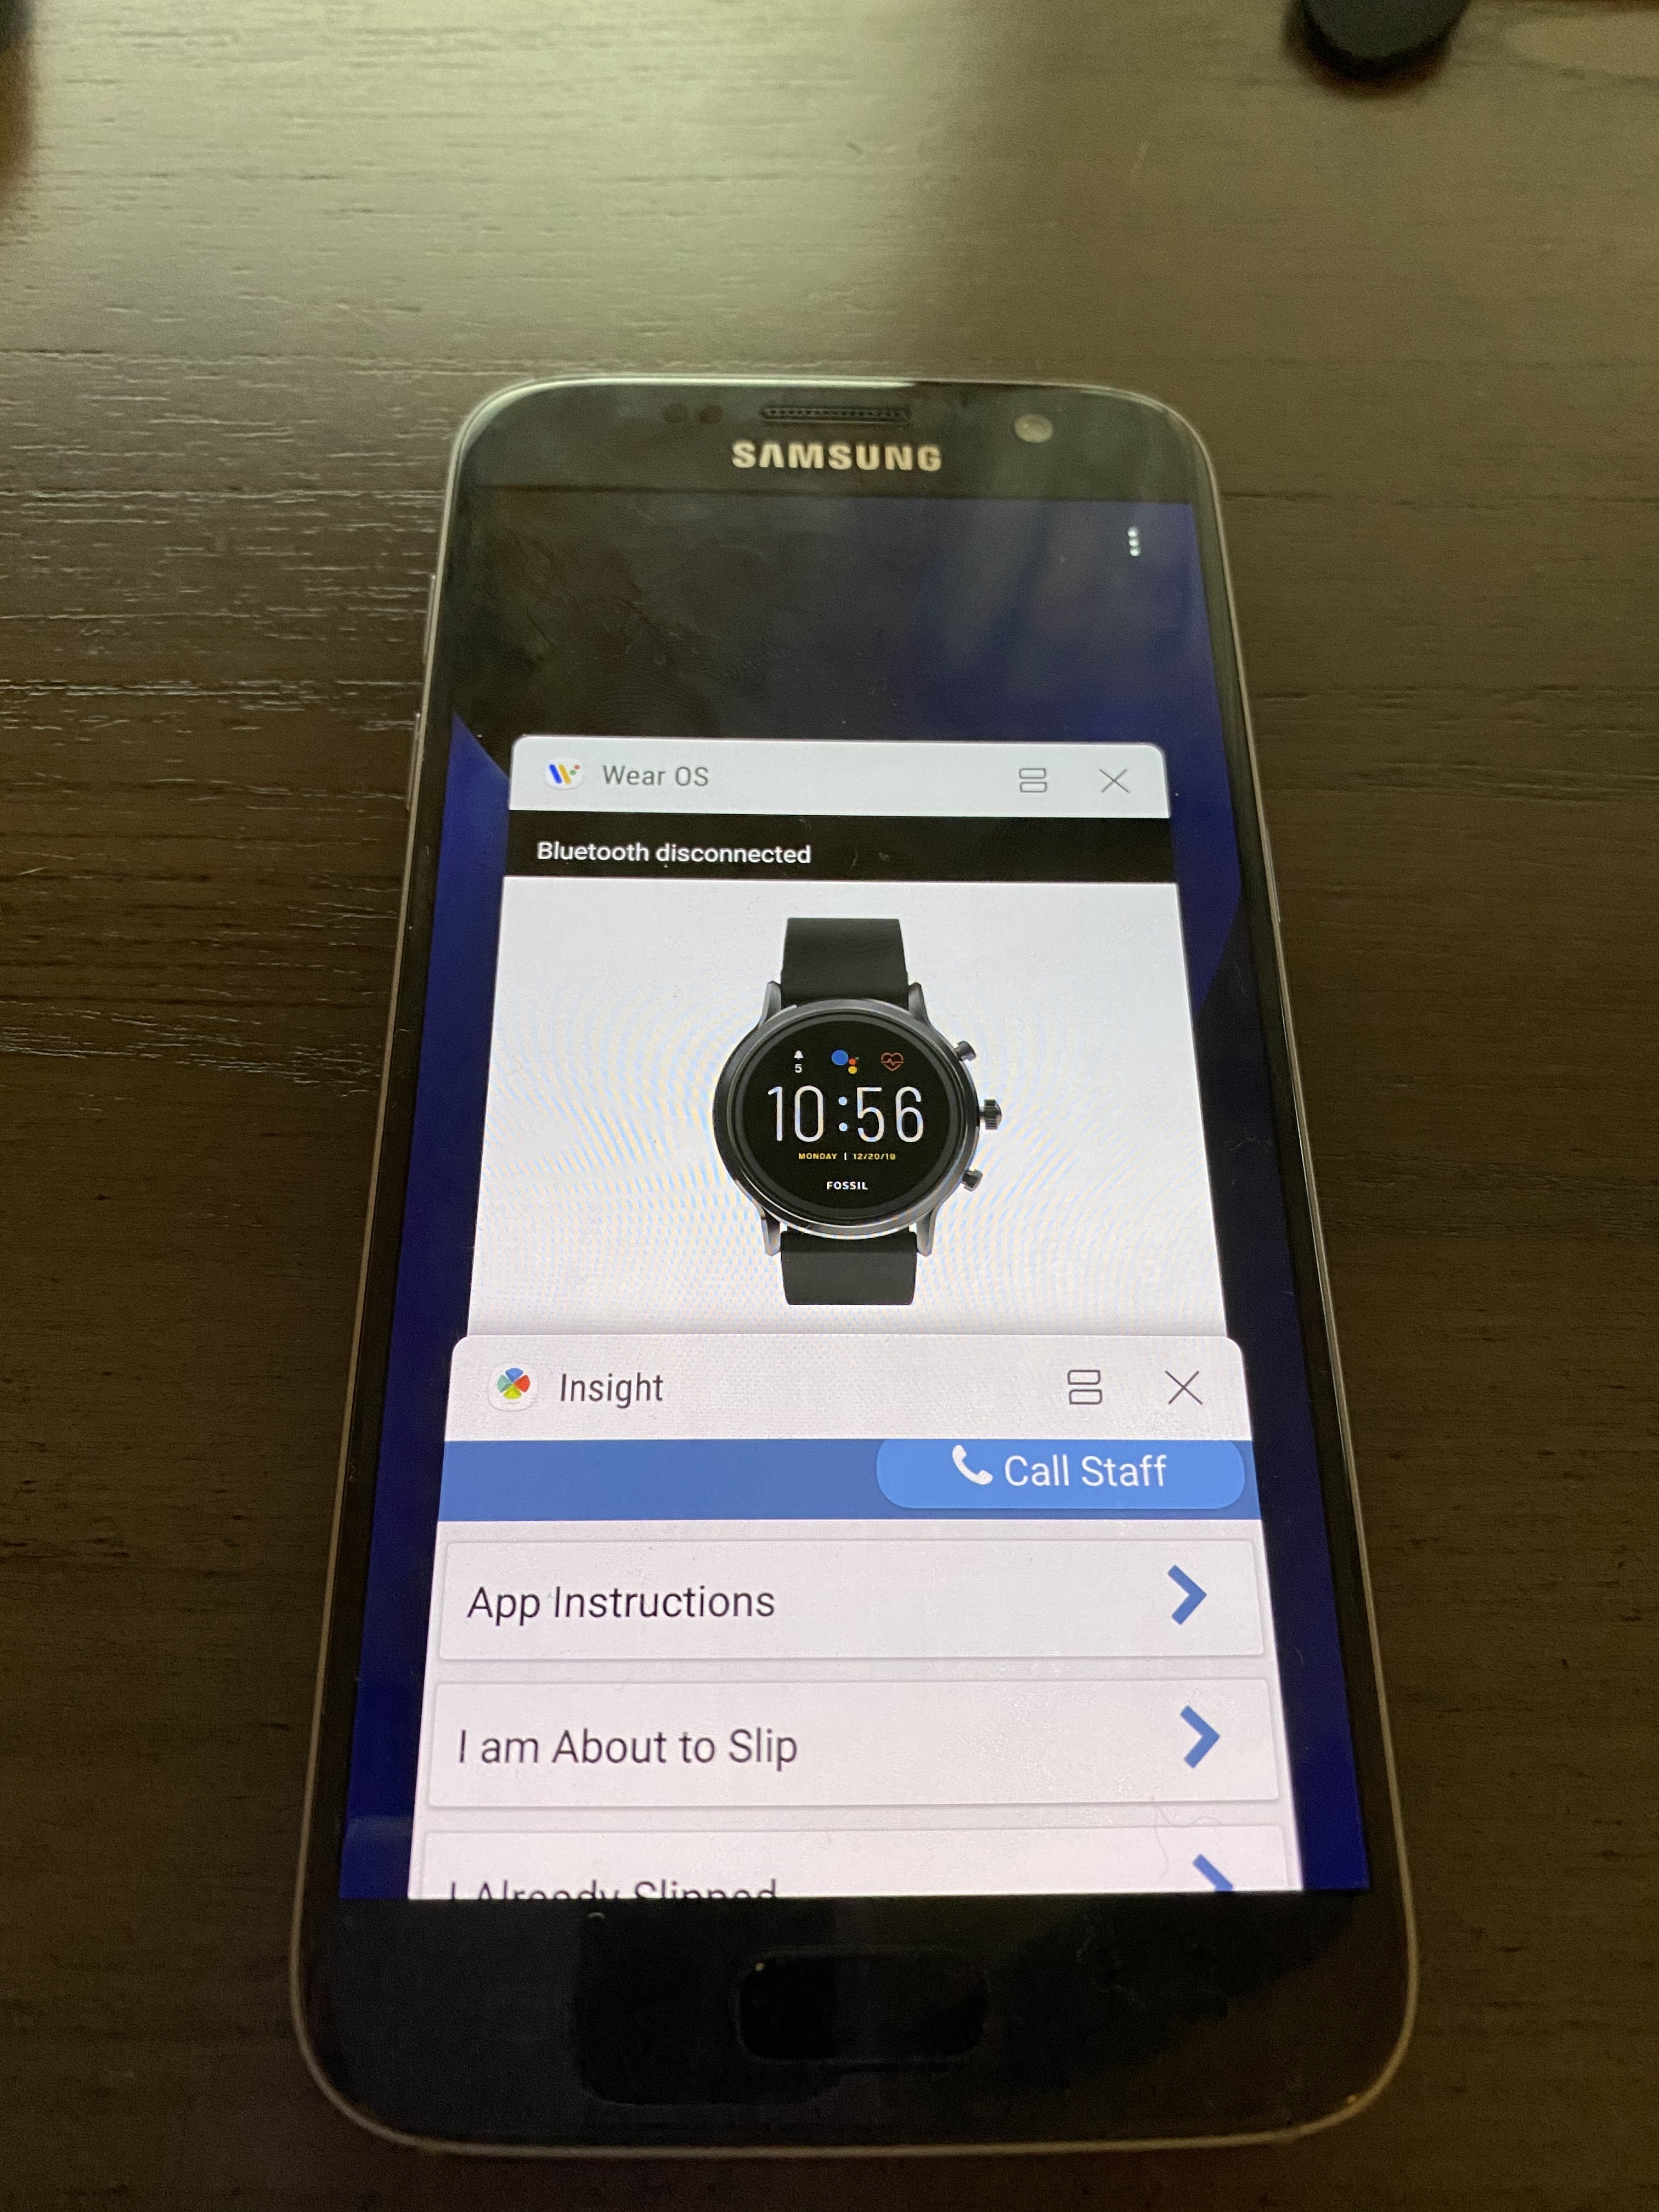 Galaxy S7 Recent Window Displays Insight and Wear OS